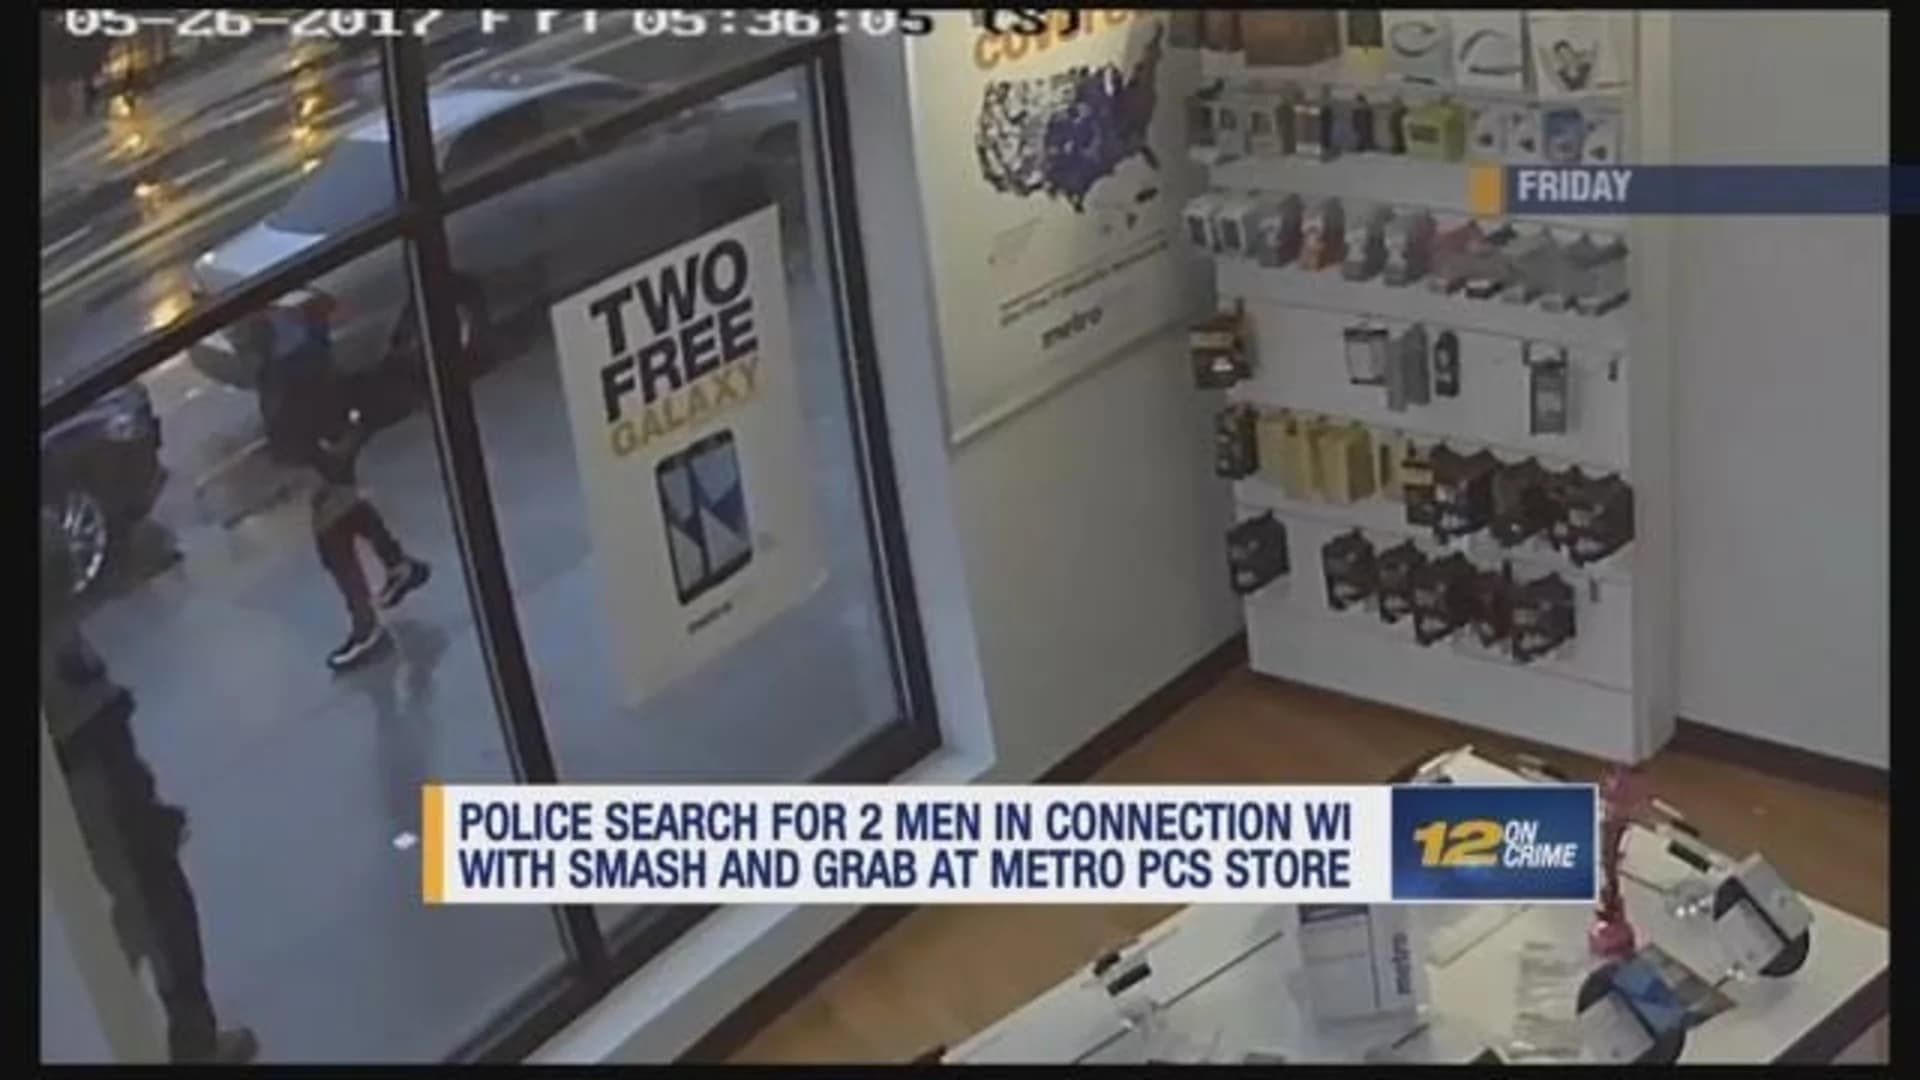 Police search for men who broke into Metro PCS store